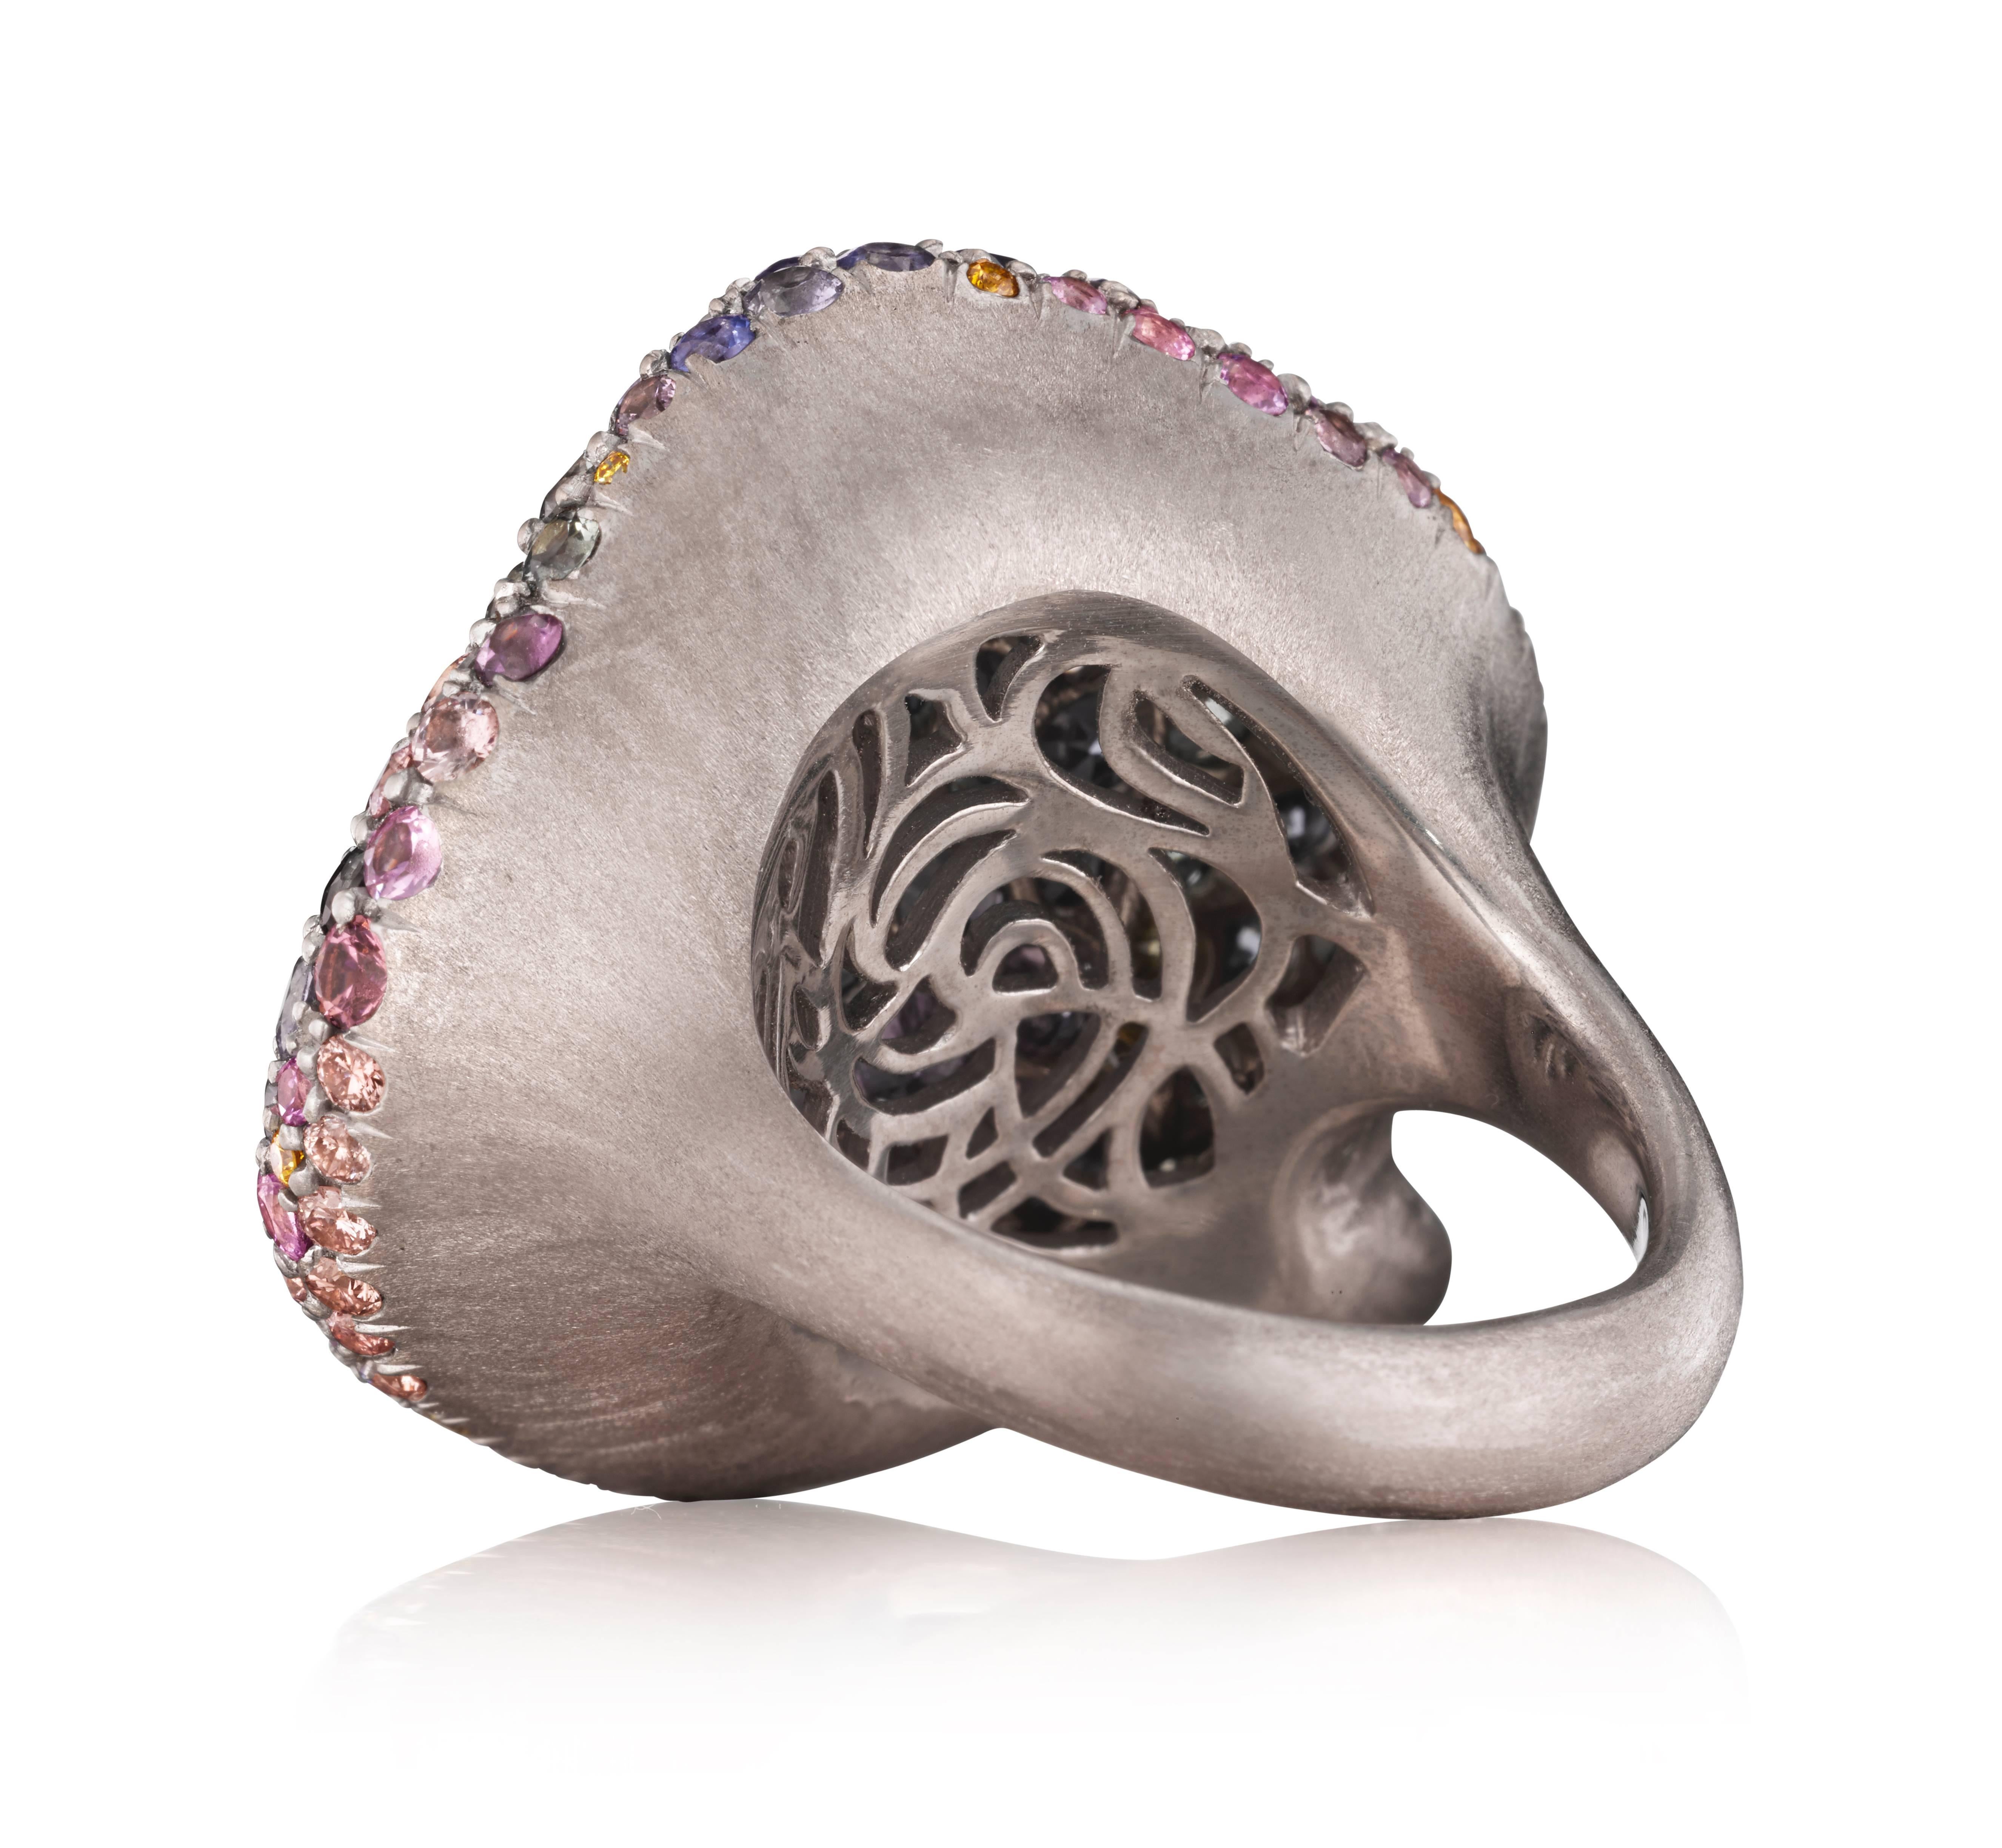 Ready to blossom on your hand, this vibrant, Spring Petal Ring was created with 18K natural white gold and set with 166 beautiful VS-FG diamonds and sapphires in a spectrum of colors. Like all rings created by Naomi Sarna, this piece is extremely